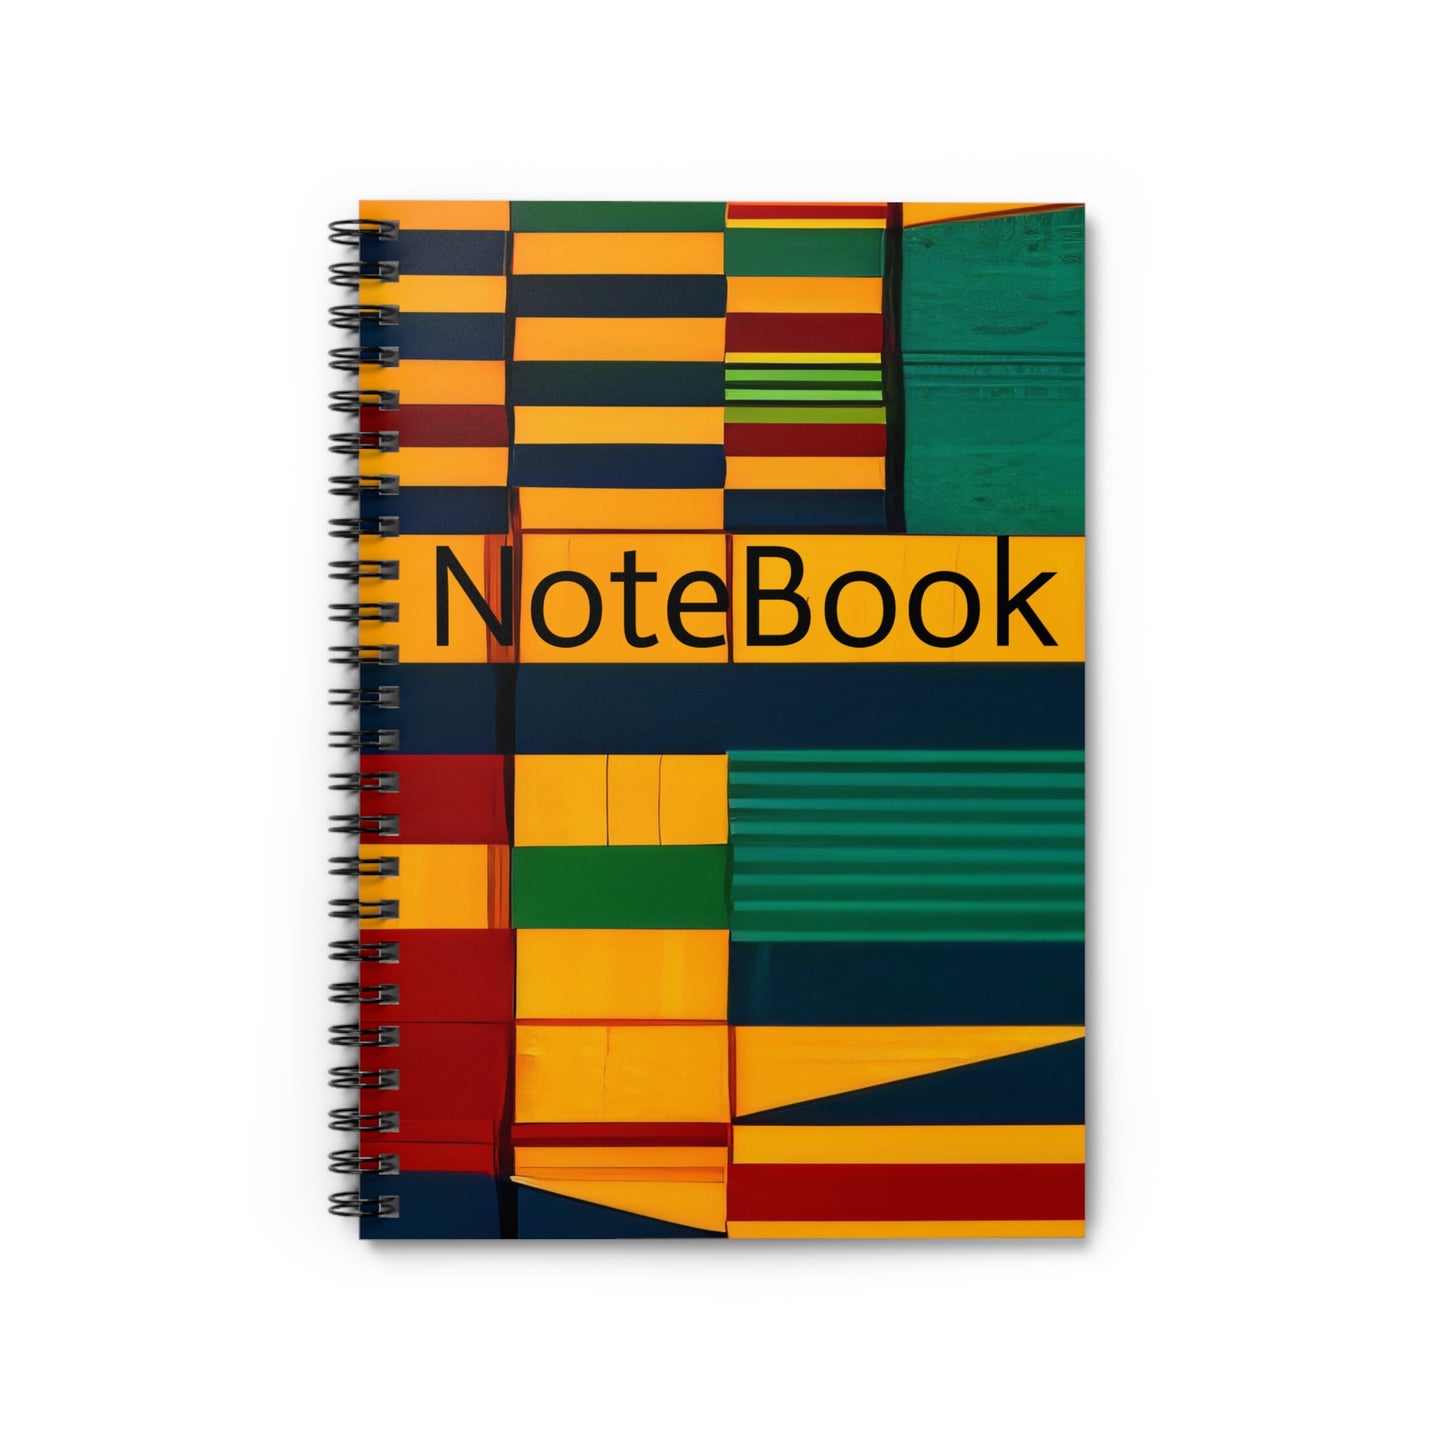 Kente Spiral Notebook Of Many Colors - Ruled Line